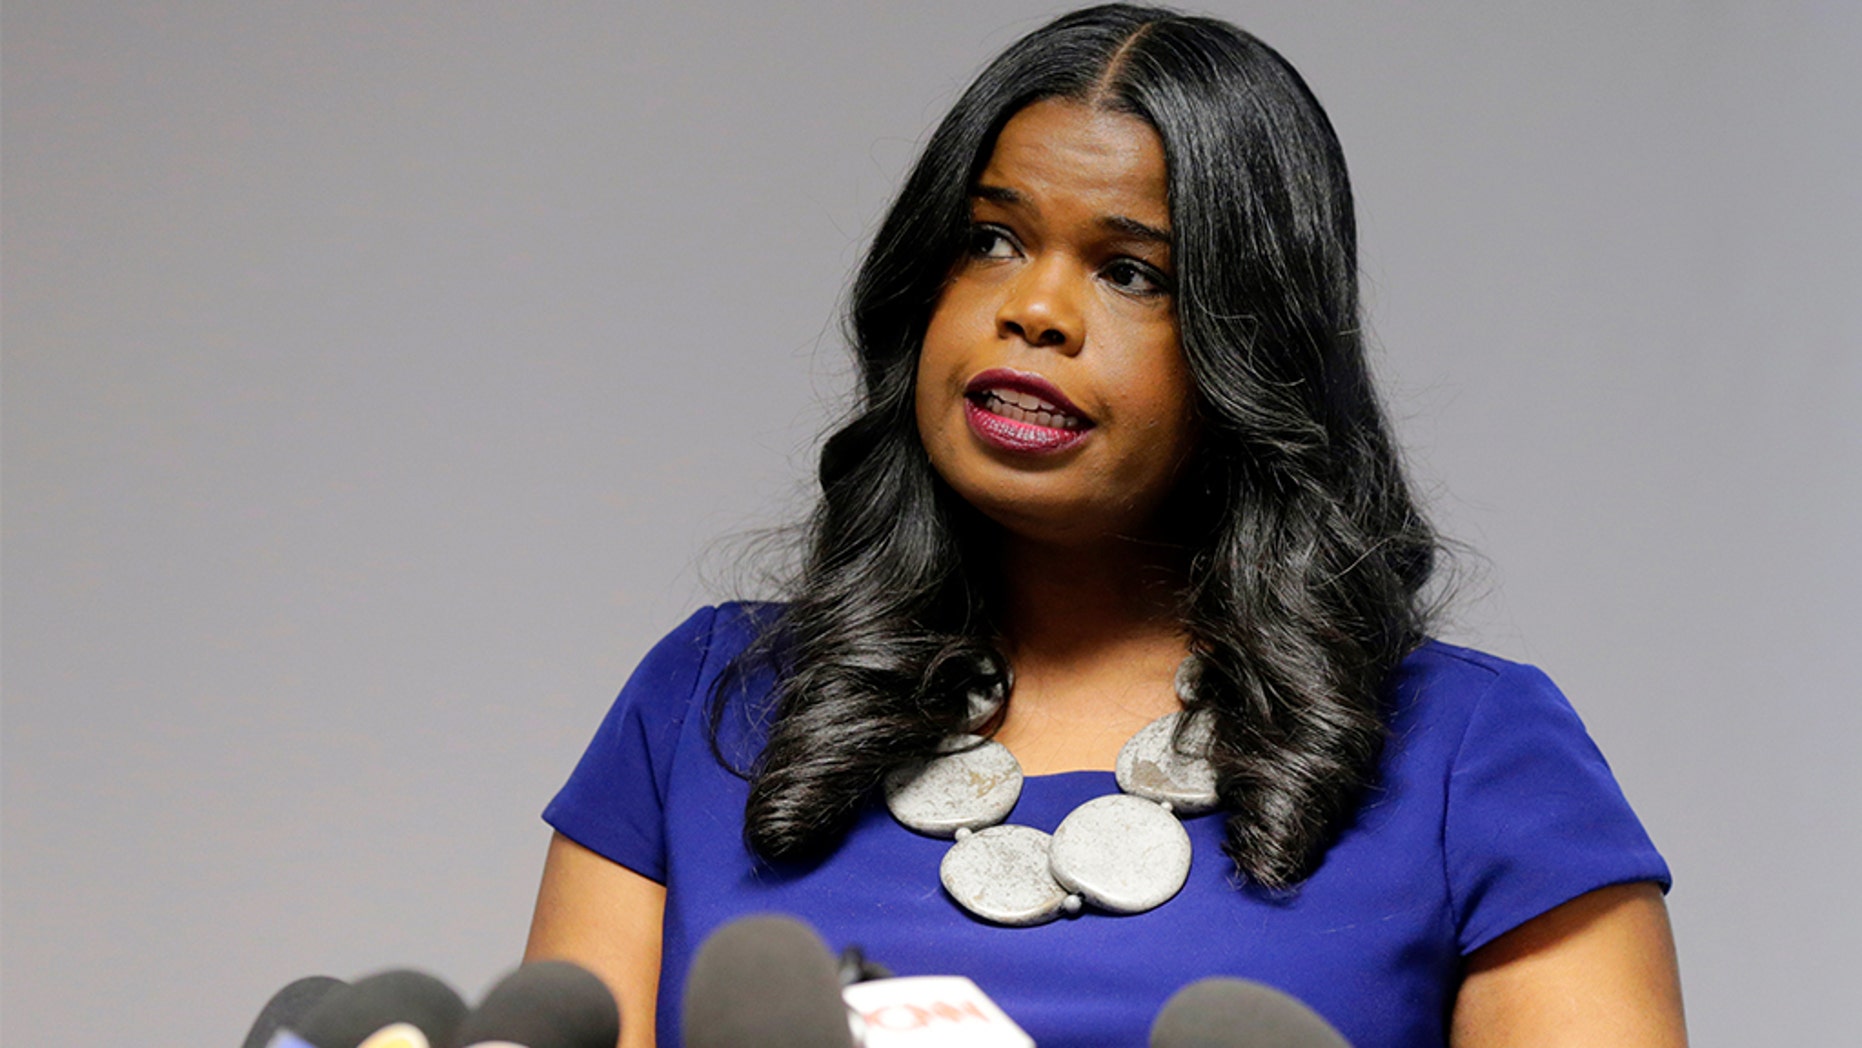 Cook County State's Attorney Kim Foxx speaking at a news conference in Chicago on February 22.